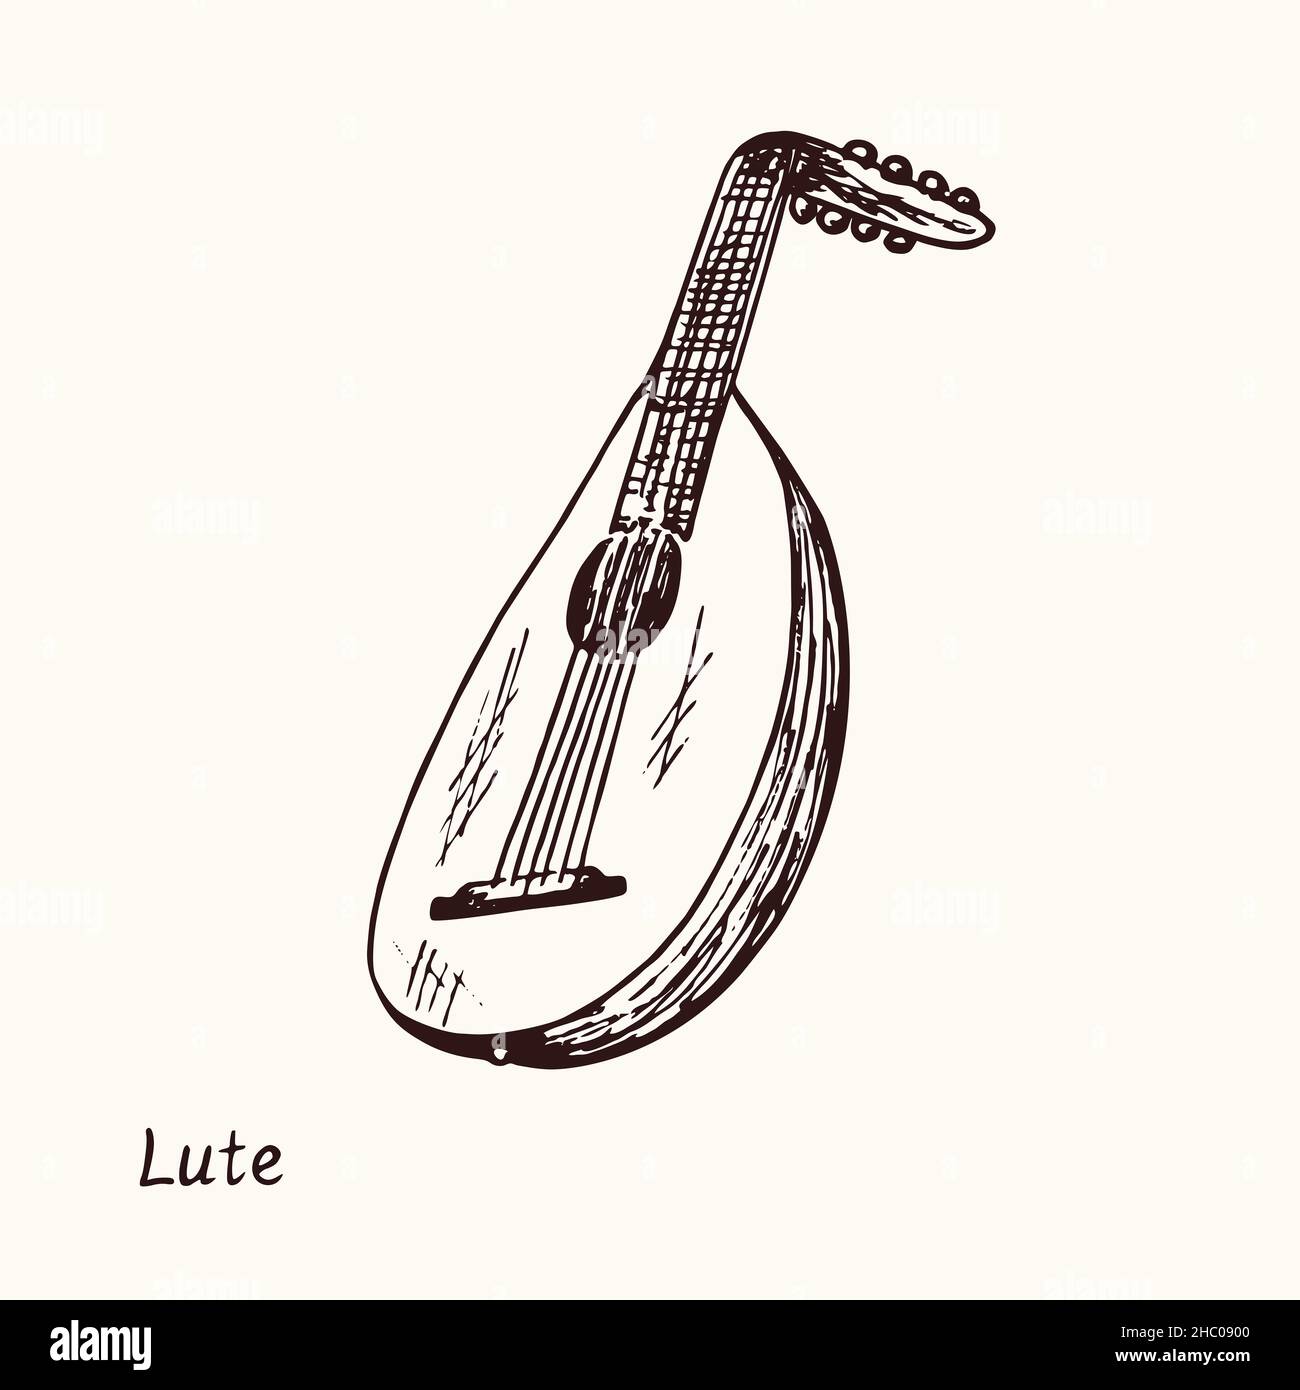 Lute. Ink black and white doodle drawing in woodcut style with